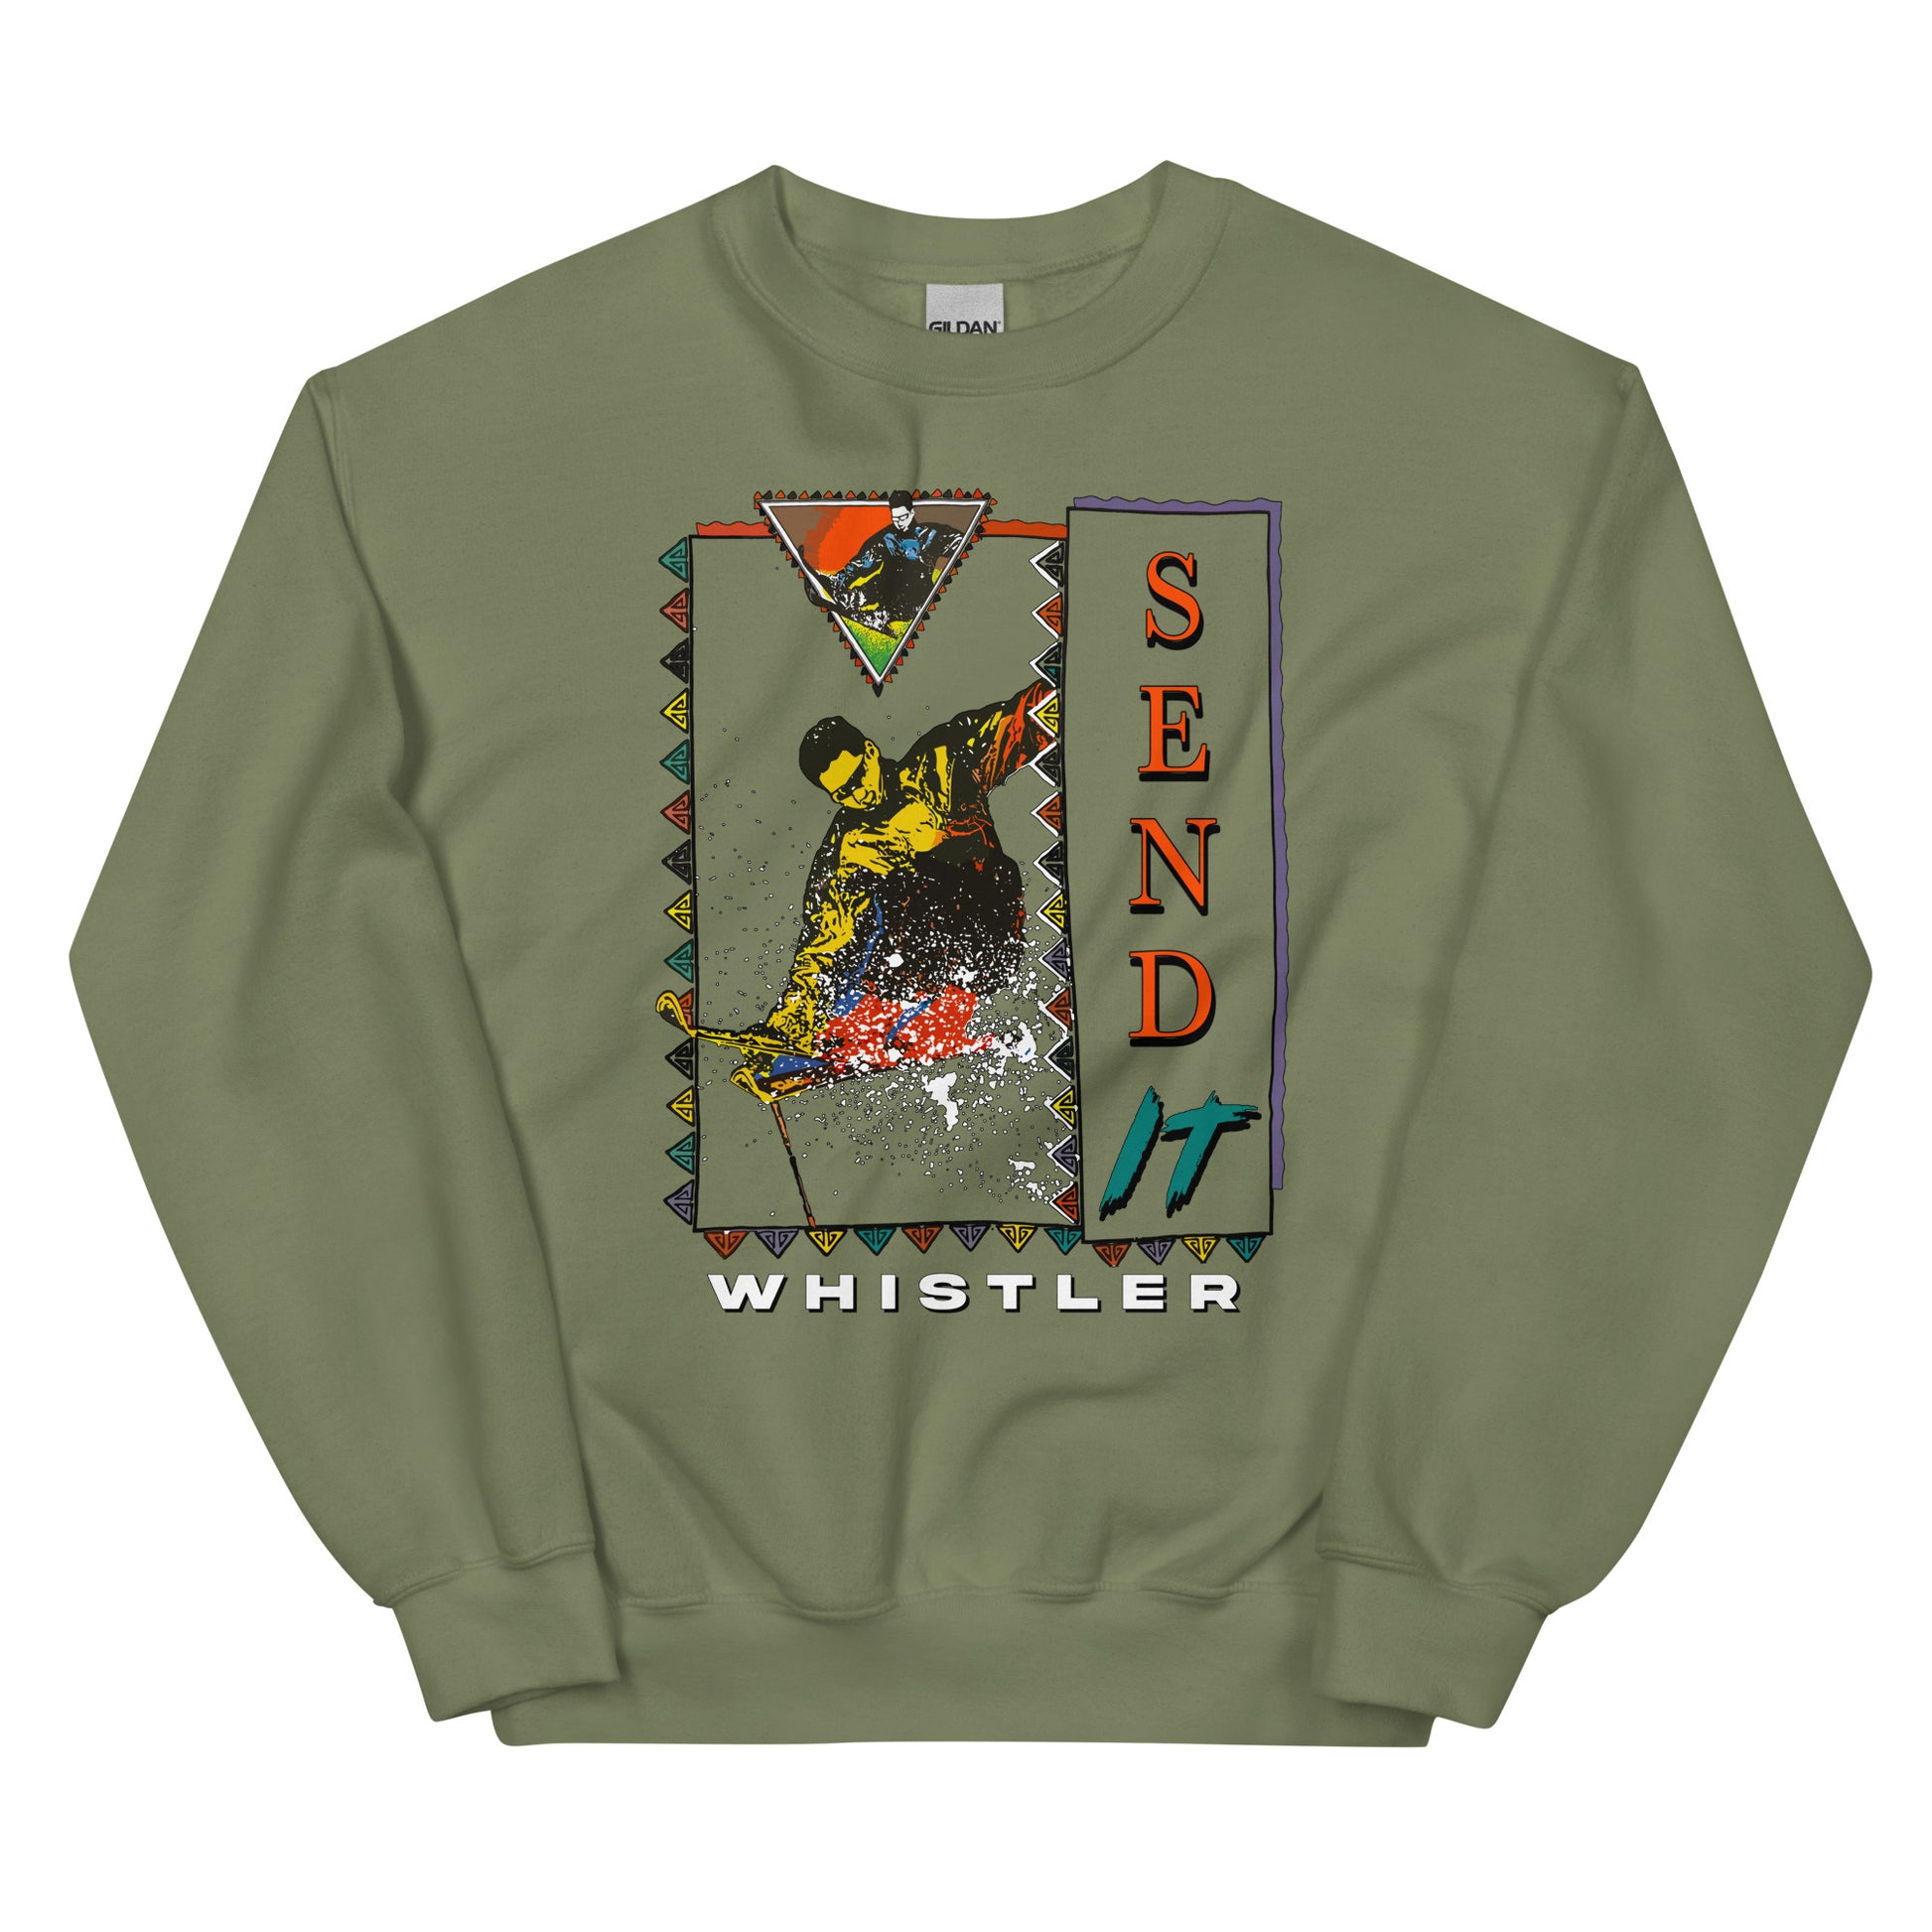 Send it whistler printed on a crewneck sweatshirt by Whistler Shirts